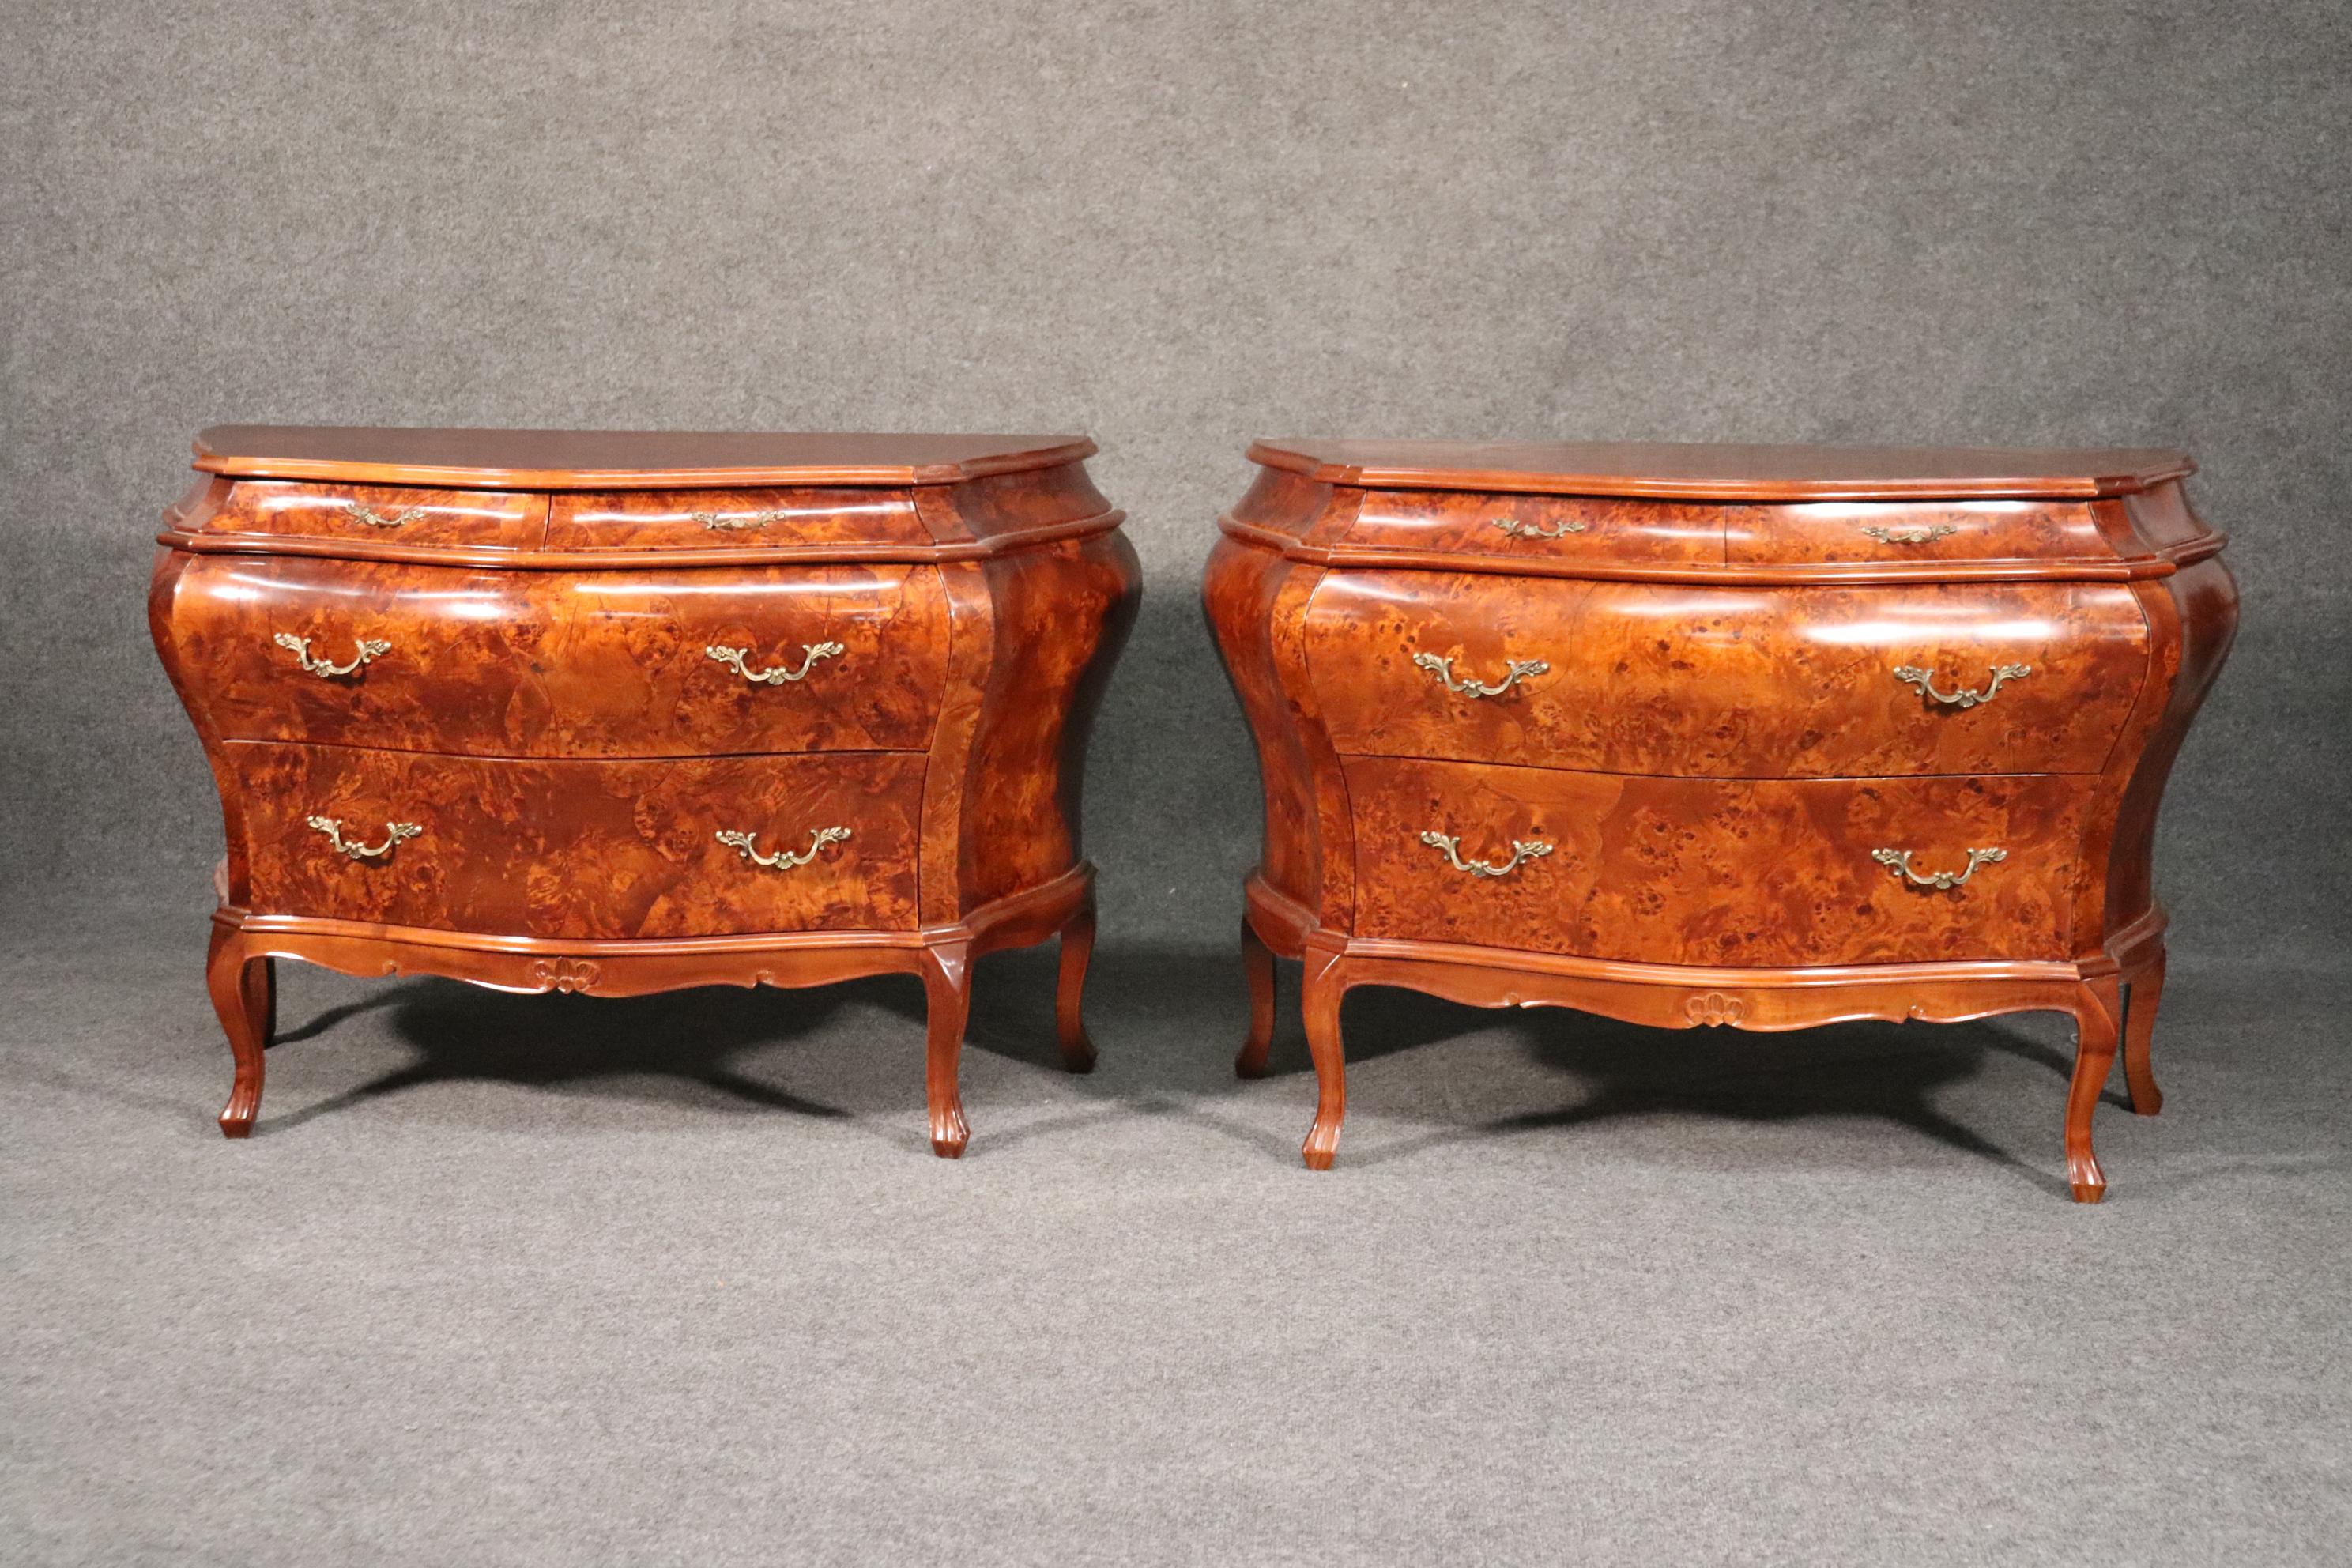 This is a beautiful pair of burled walnut Italian made commodes. Labeled made in Italy these commodes are designed in the bombe style and measures 29 inches tall x 45 inches wide x 19 inches deep. They date to the 1960s and are in good used